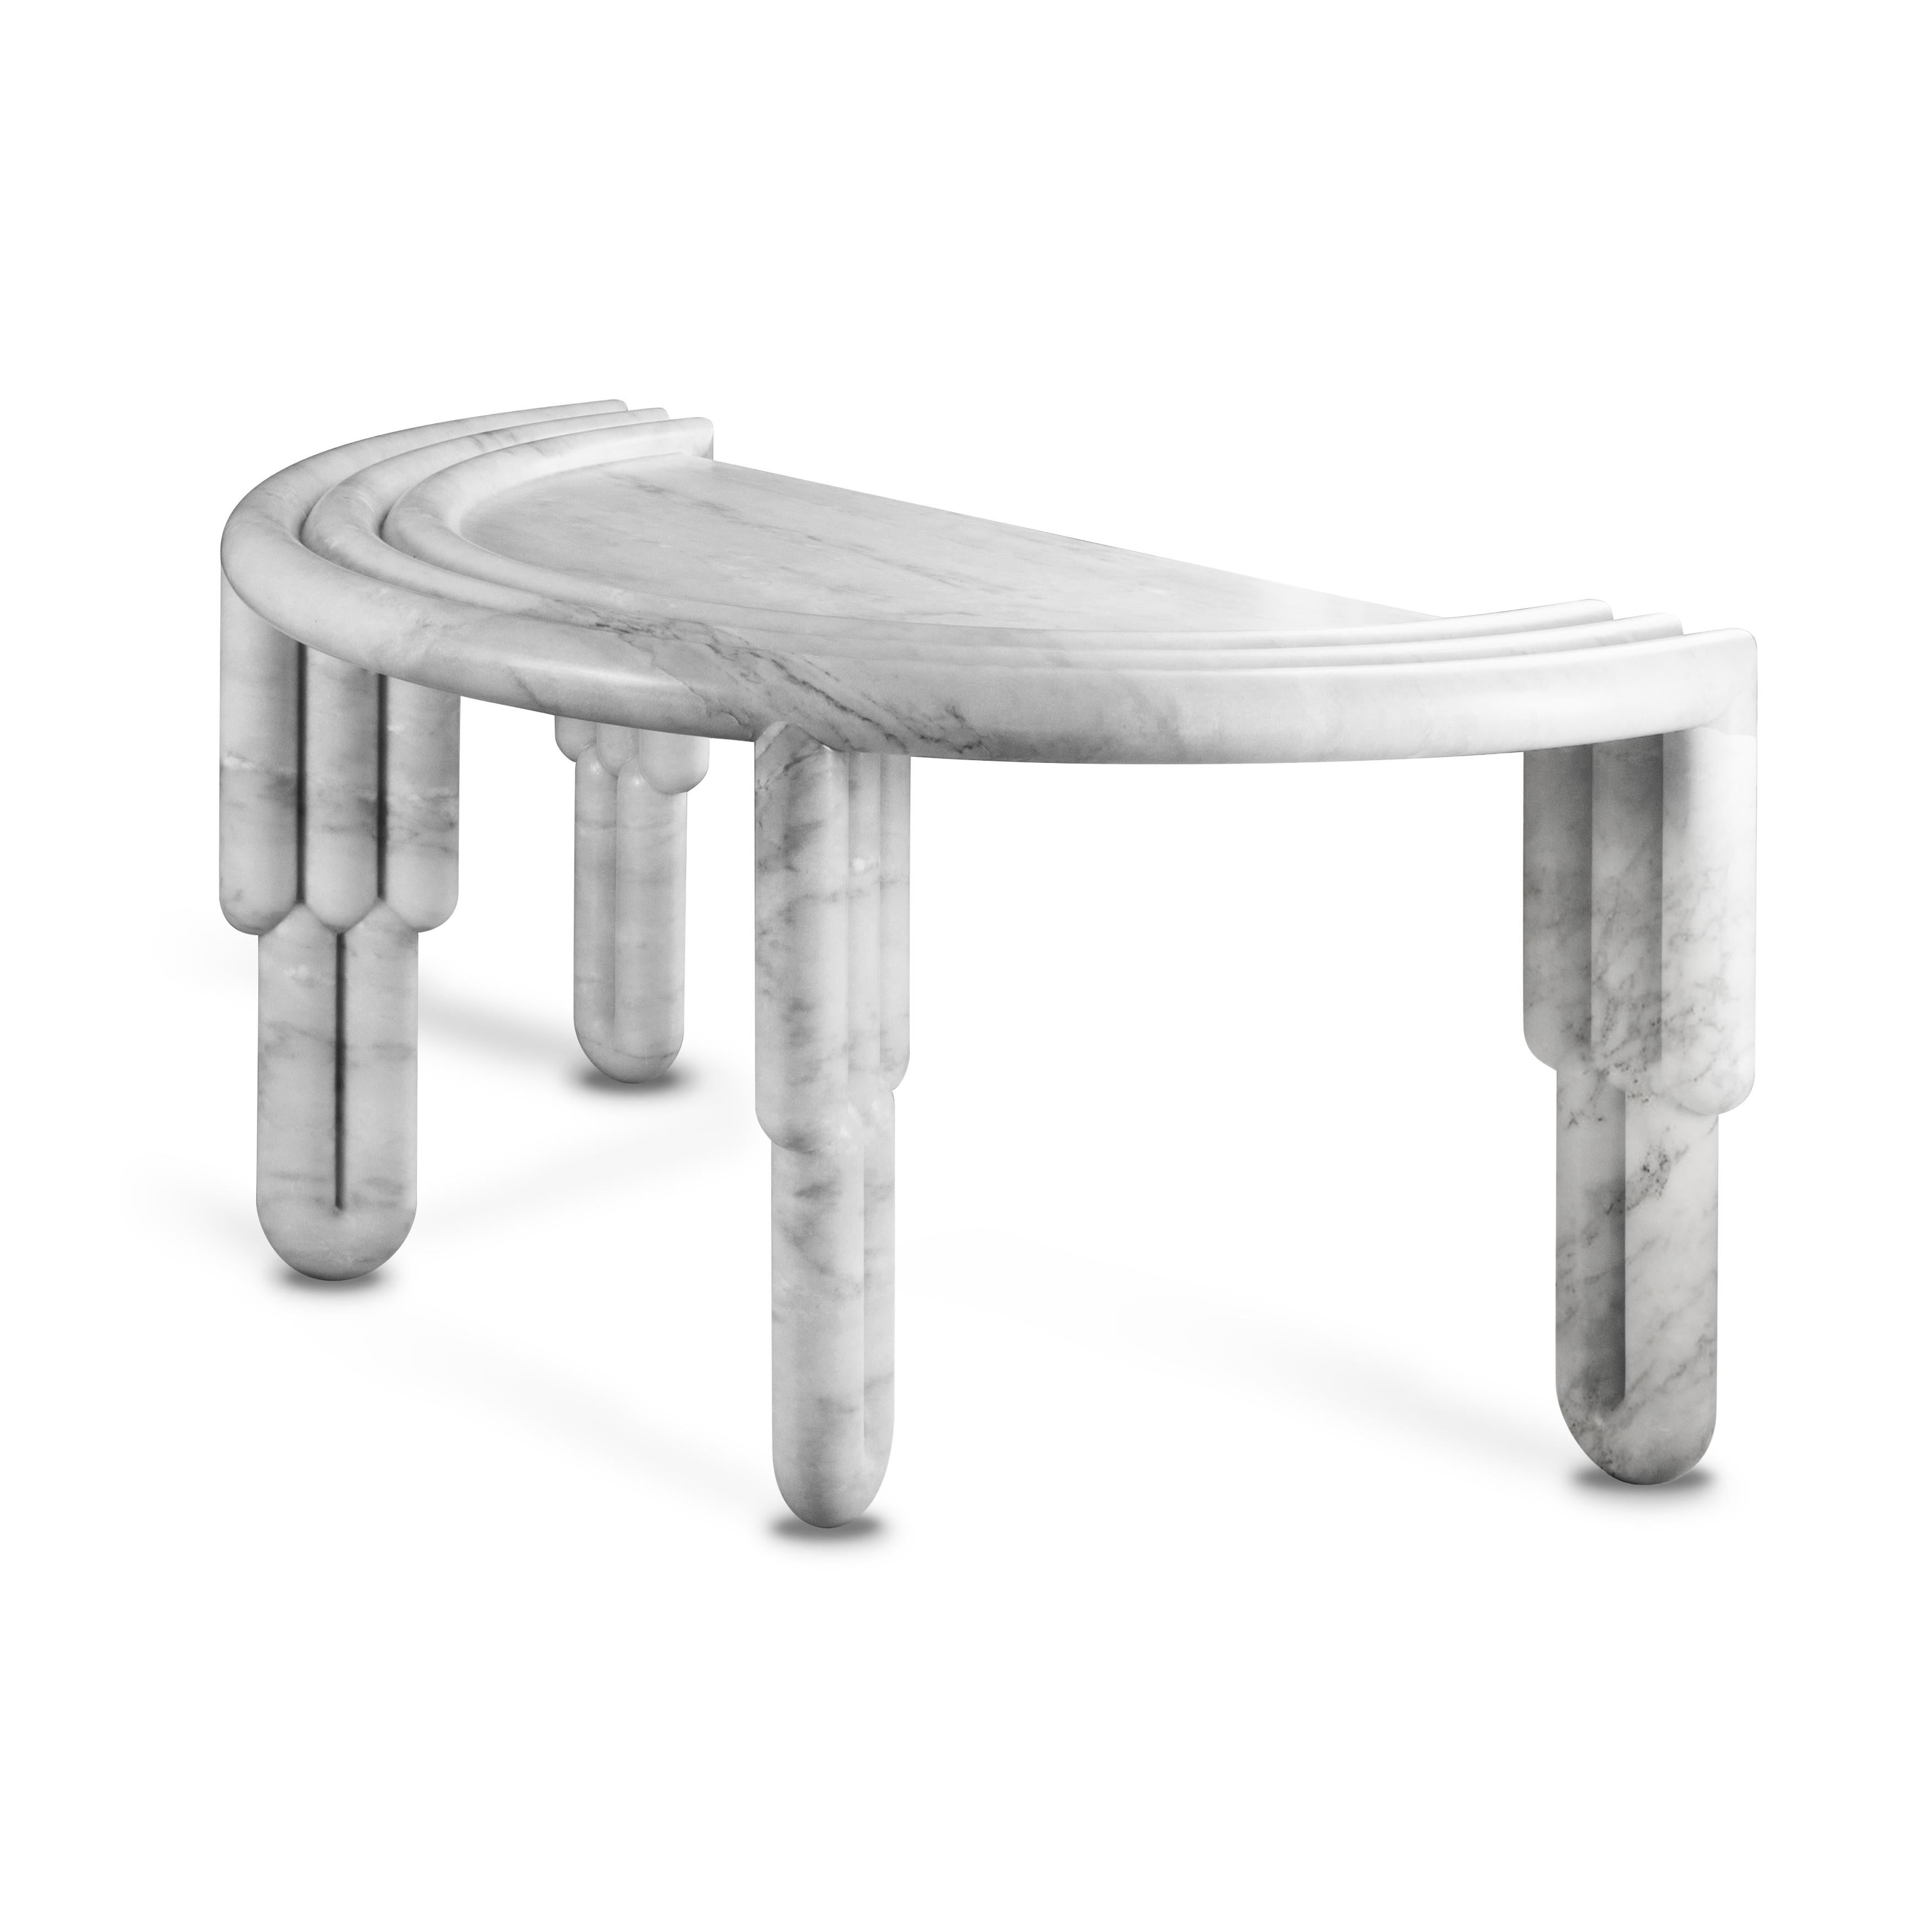 The Kipferl marble desk is made from rosa portugalo marble and has sculptural batons, reminiscent of sponge fingers, which support its top, a semi-circular crescent sug-gesting a sugar coated variety of the noble Austrian pastry.